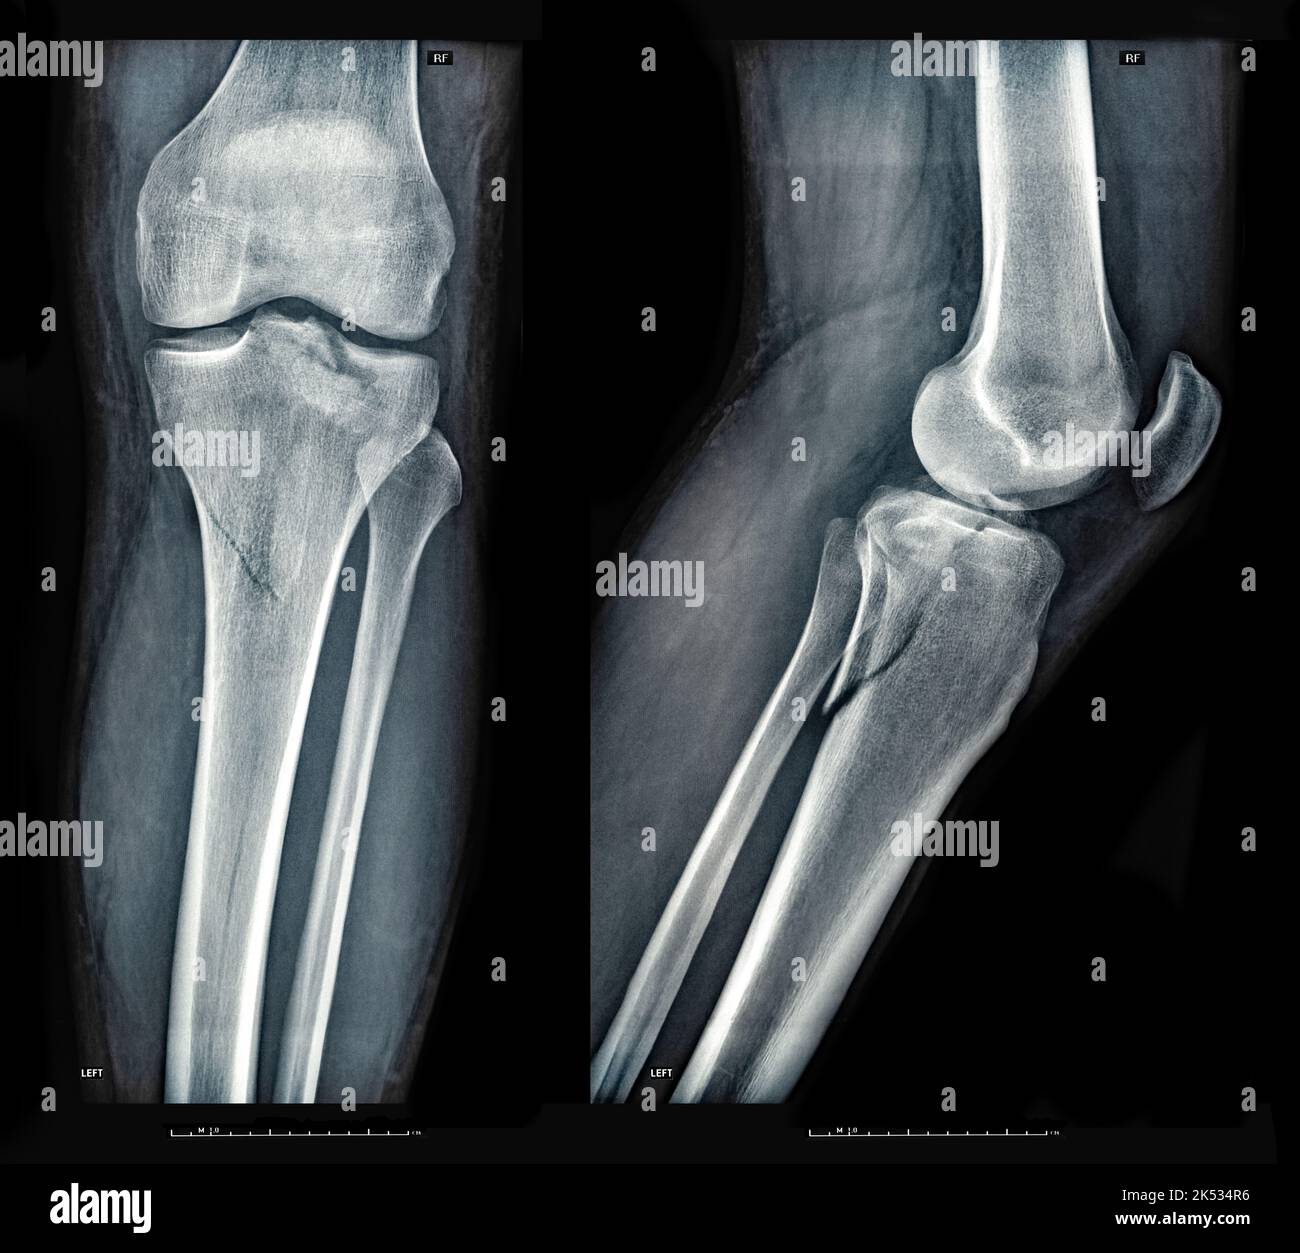 Xray images showing real fracture of broken leg bone under the knee after injury Stock Photo